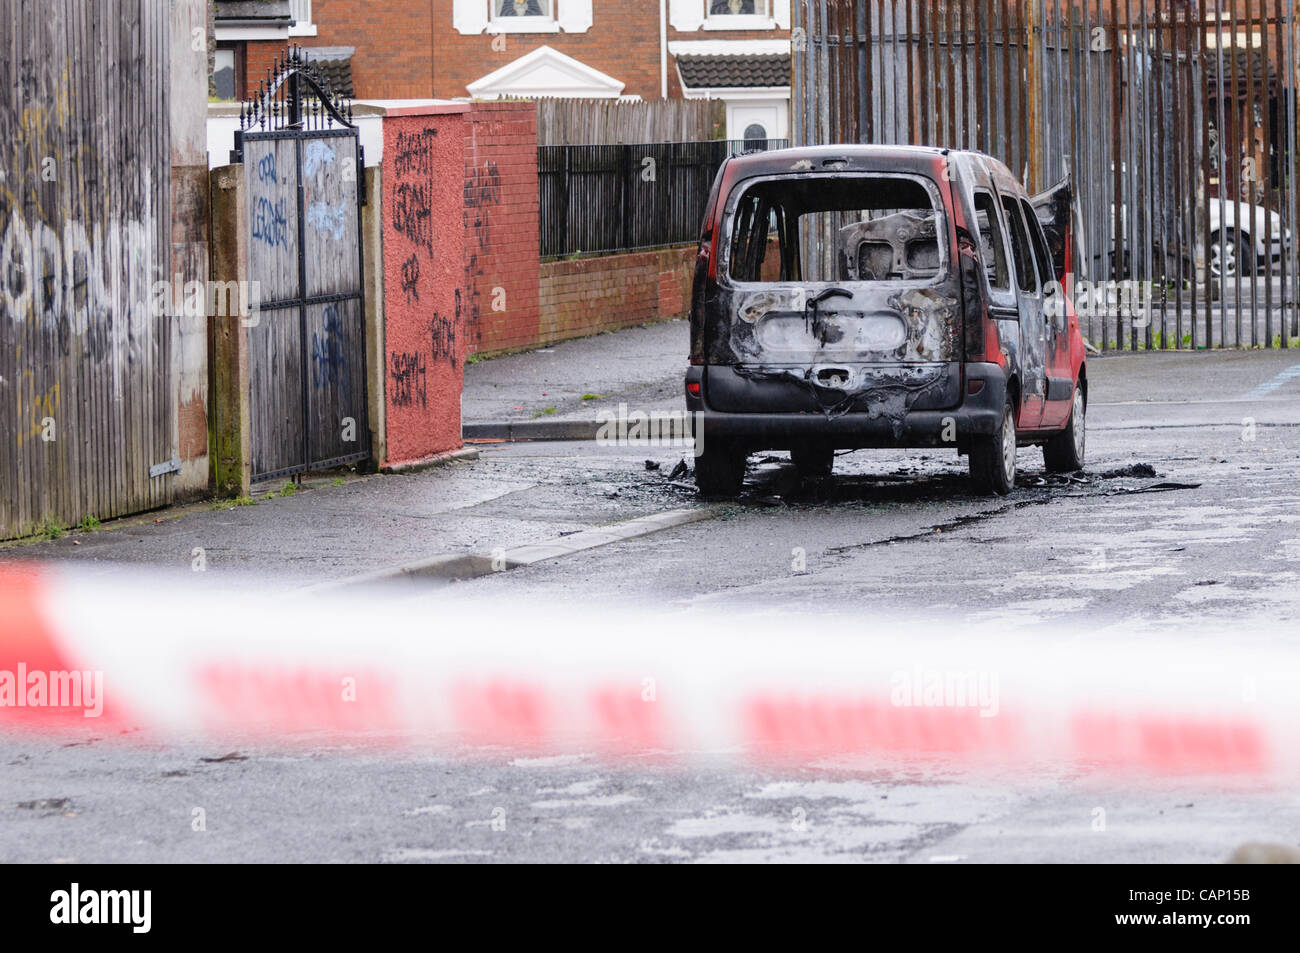 A burned out van is cordoned off by police after it was involved in a crime. Stock Photo